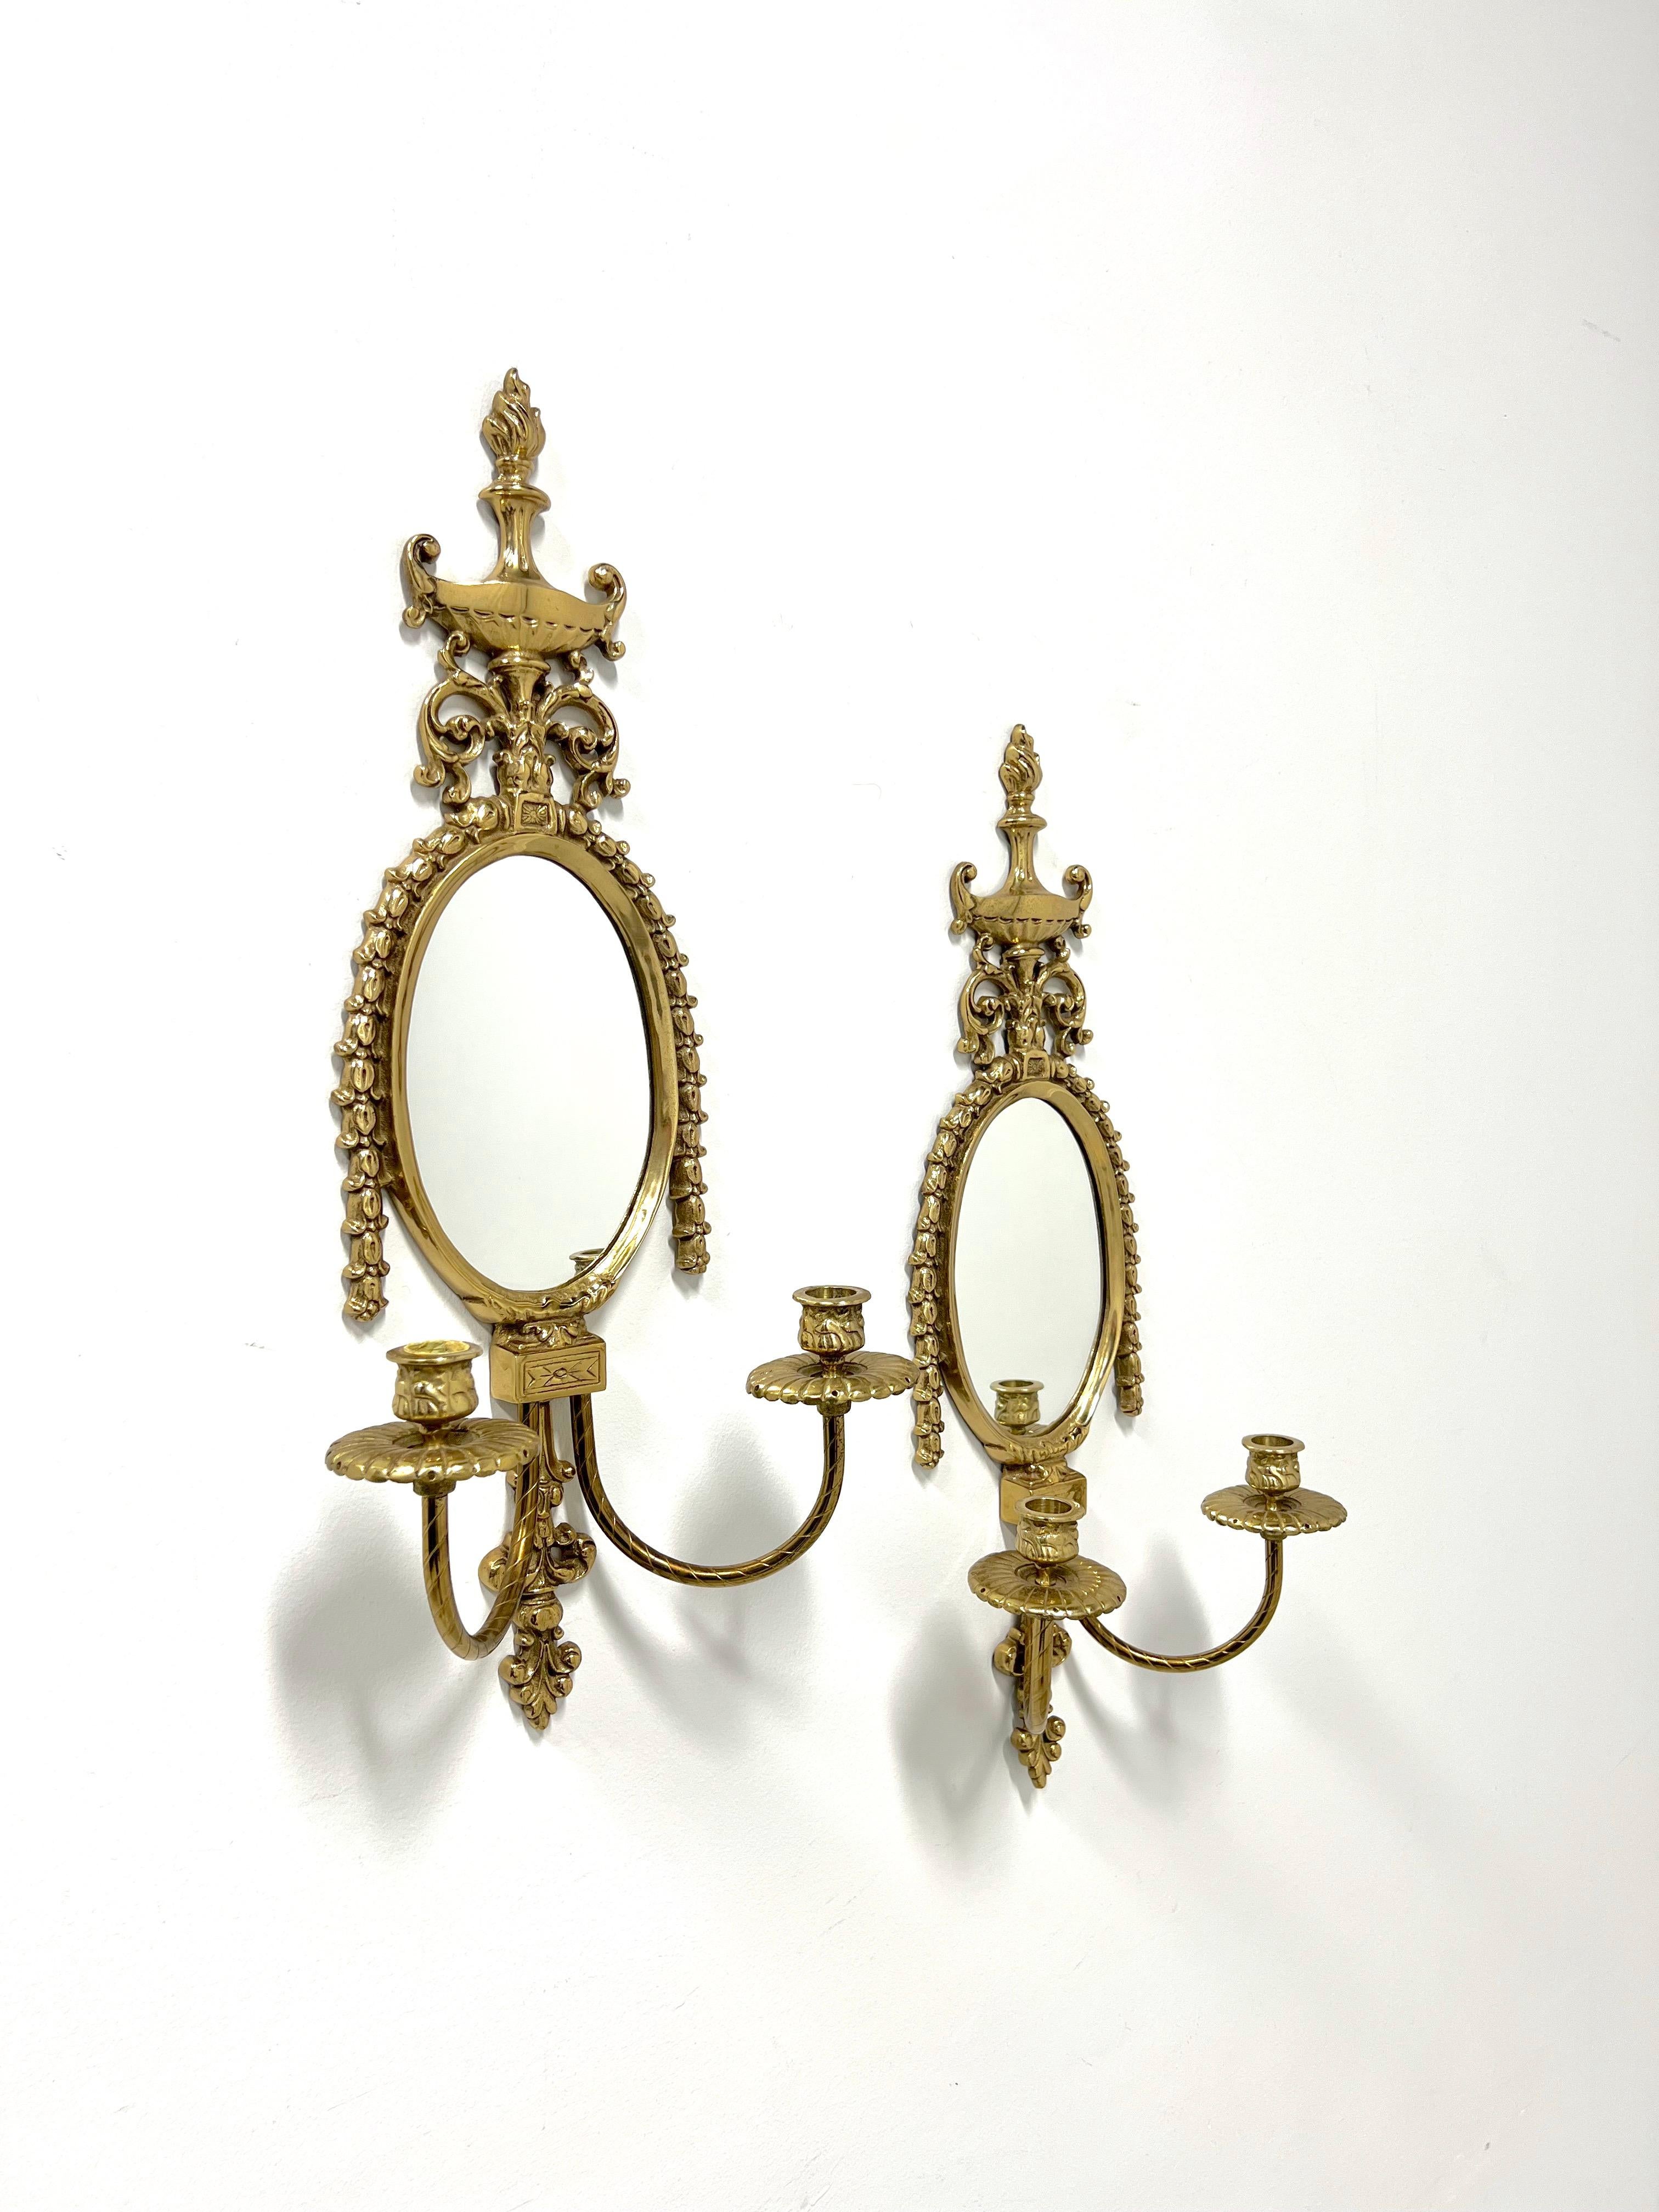 GLO-MAR ARTWORKS Mid 20th Century Brass French Provincial Candle Sconces - Pair For Sale 6